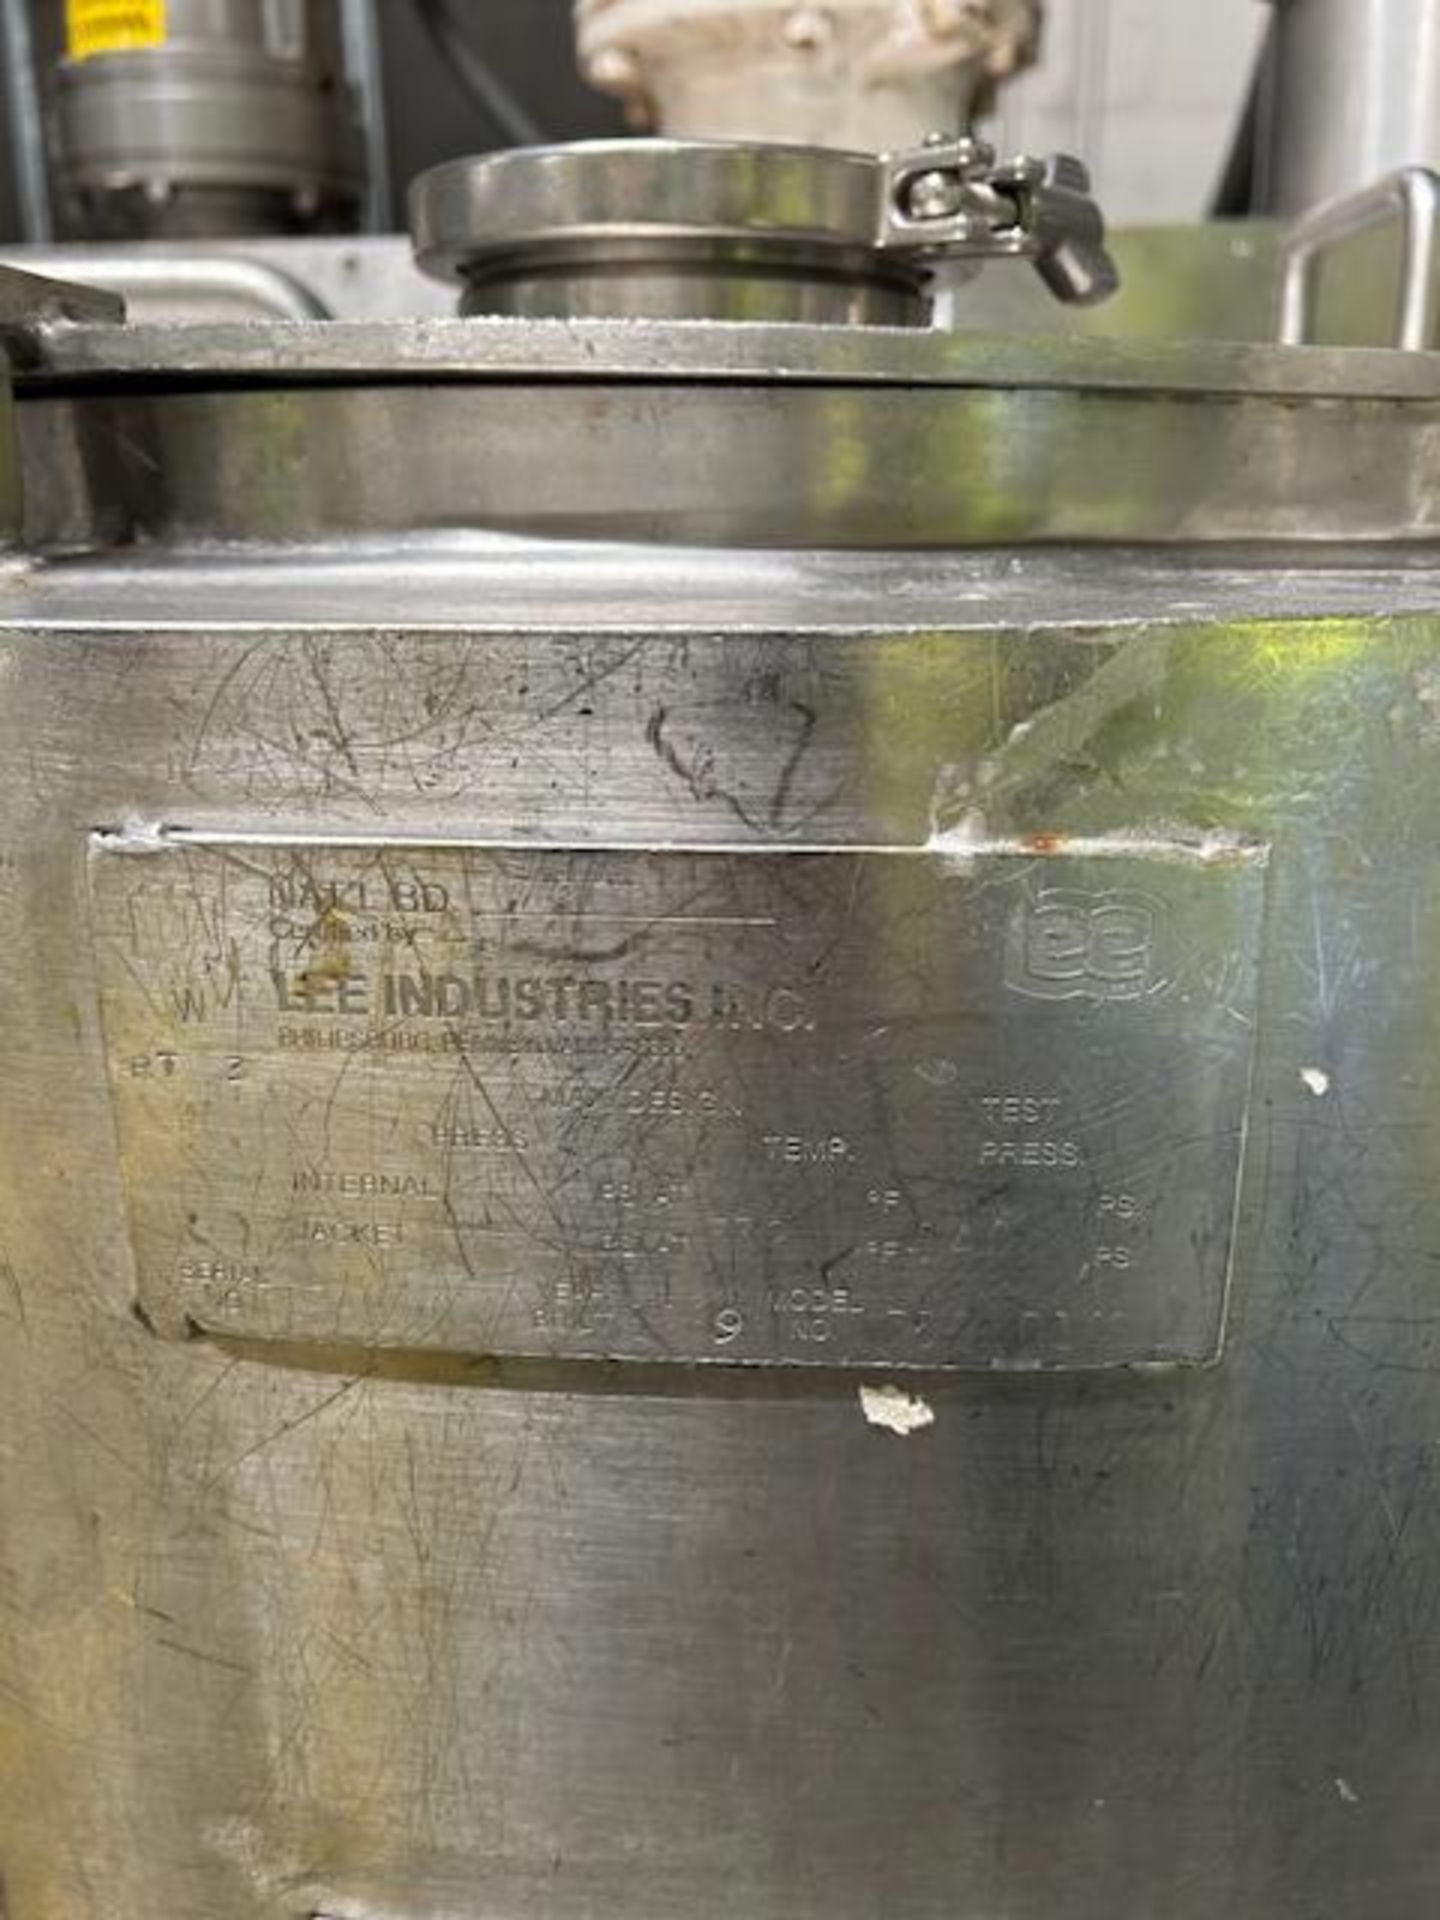 Lee Industries 750D10S 750-Gallon Stainless Steel Jacketed Kettle - Image 7 of 8